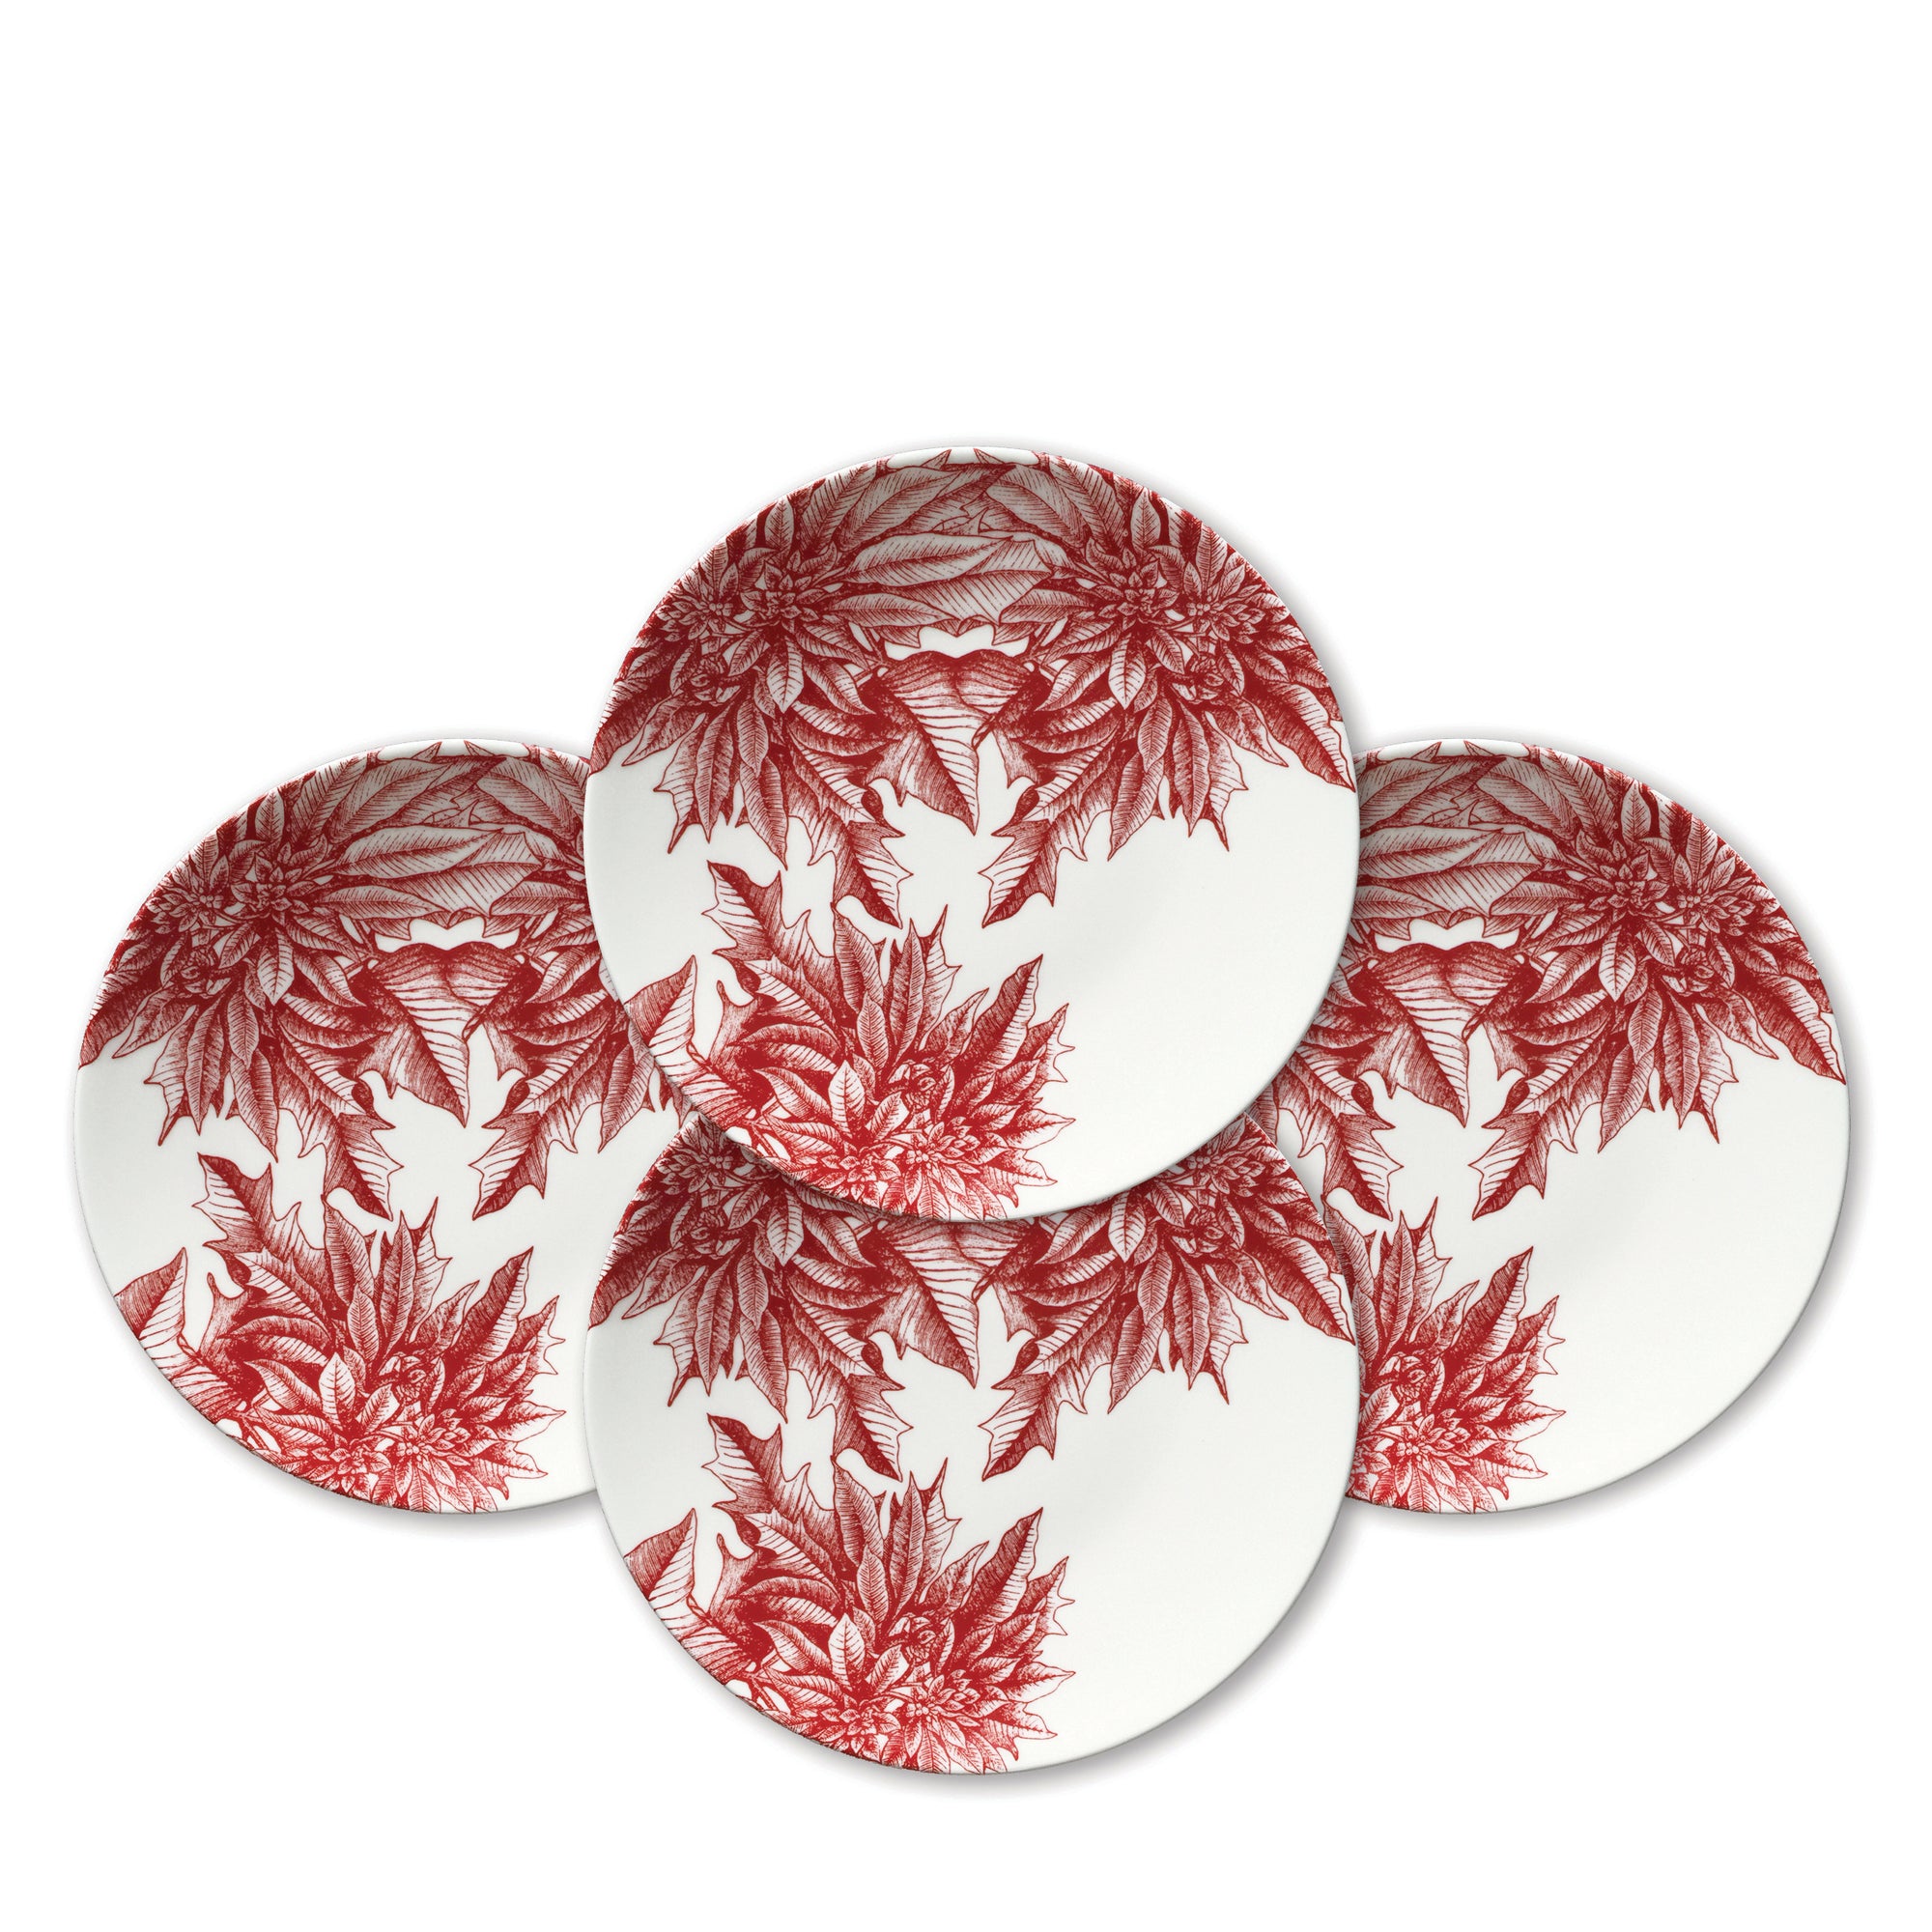 A white porcelain Poinsettia Coupe Salad Plate from Caskata Artisanal Home, decorated with vibrant red poinsettia flowers, perfect for adding a festive touch to your holiday table.